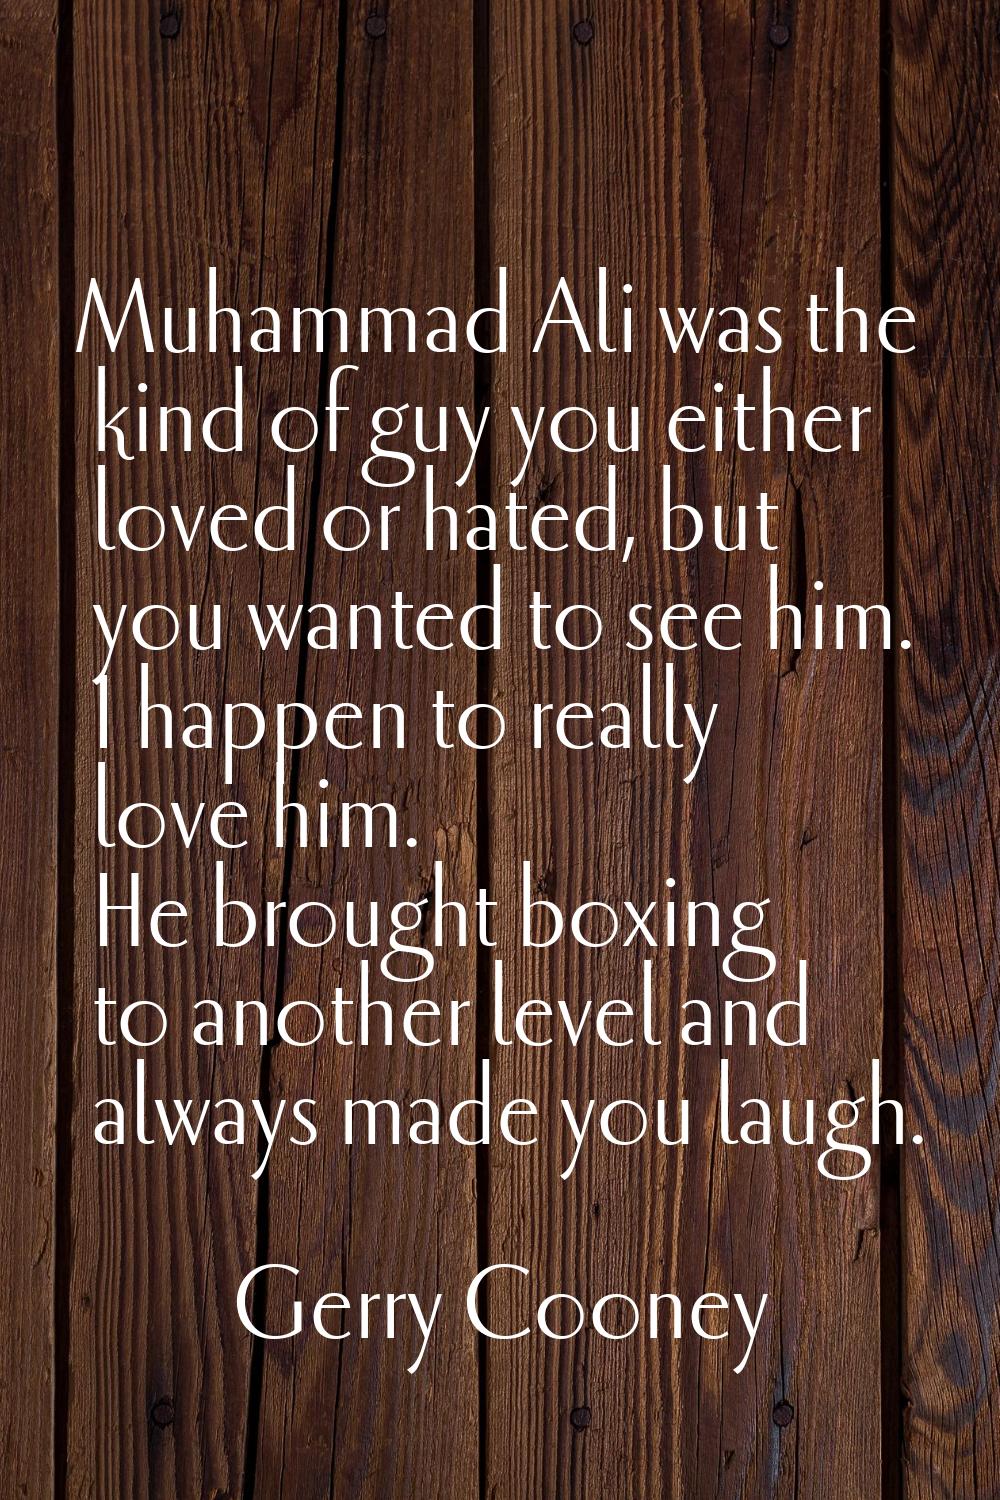 Muhammad Ali was the kind of guy you either loved or hated, but you wanted to see him. I happen to 